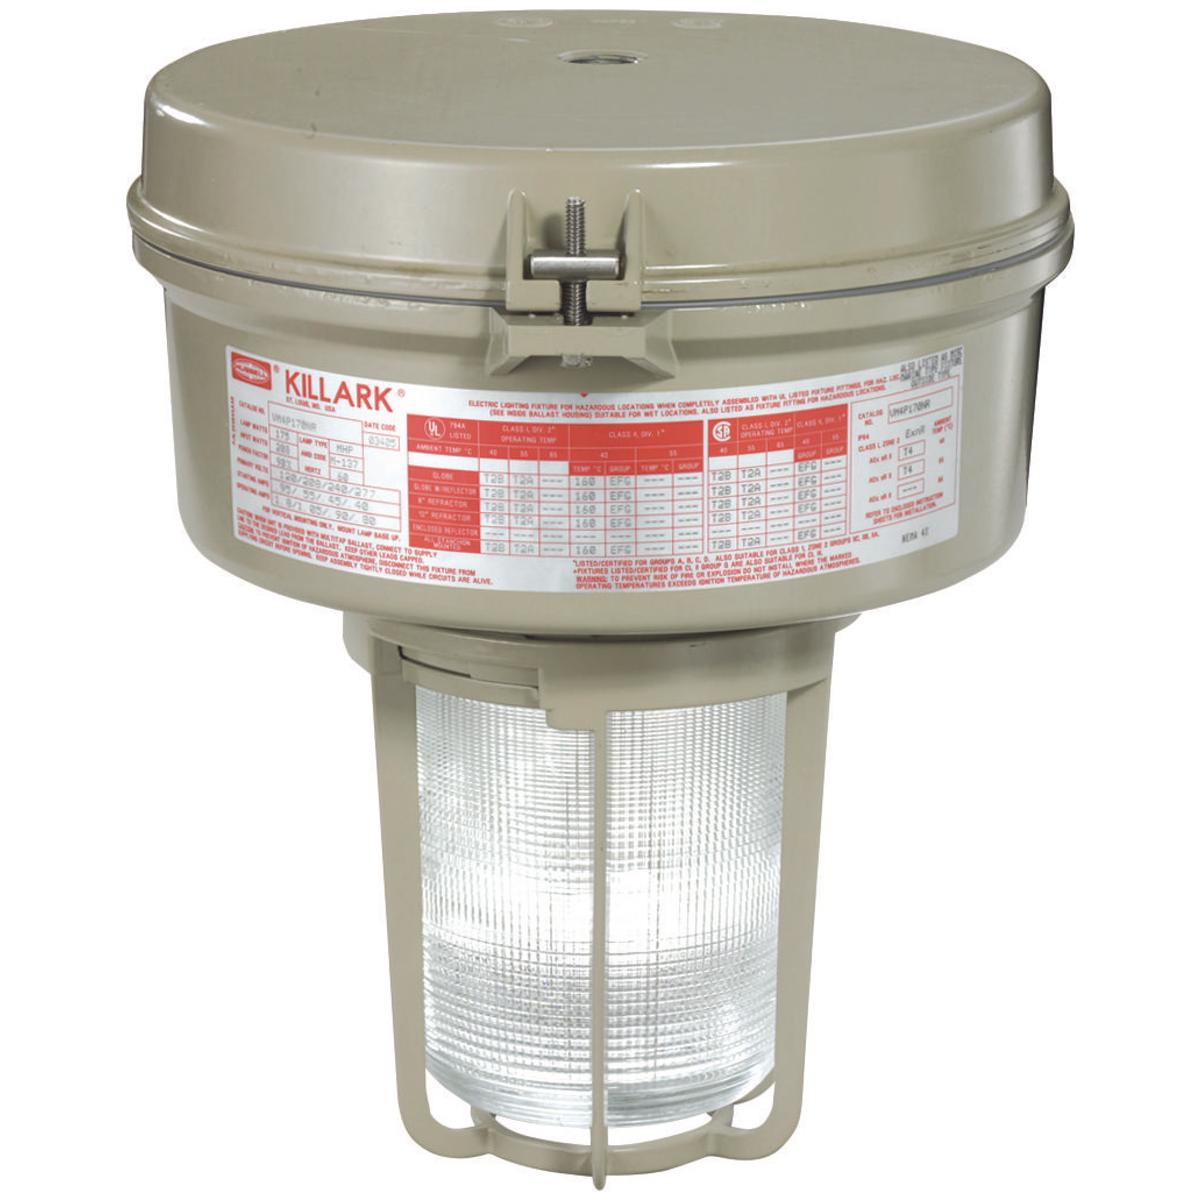 Hubbell VM3H100F2R5G VM3 Series - 100W Metal Halide Quadri-Volt - 3/4" Flexible Pendant - Type V Glass Refractor and Guard  ; Ballast tank and splice box – corrosion resistant copper-free aluminum alloy with baked powder epoxy/polyester finish, electrostatically applied for c